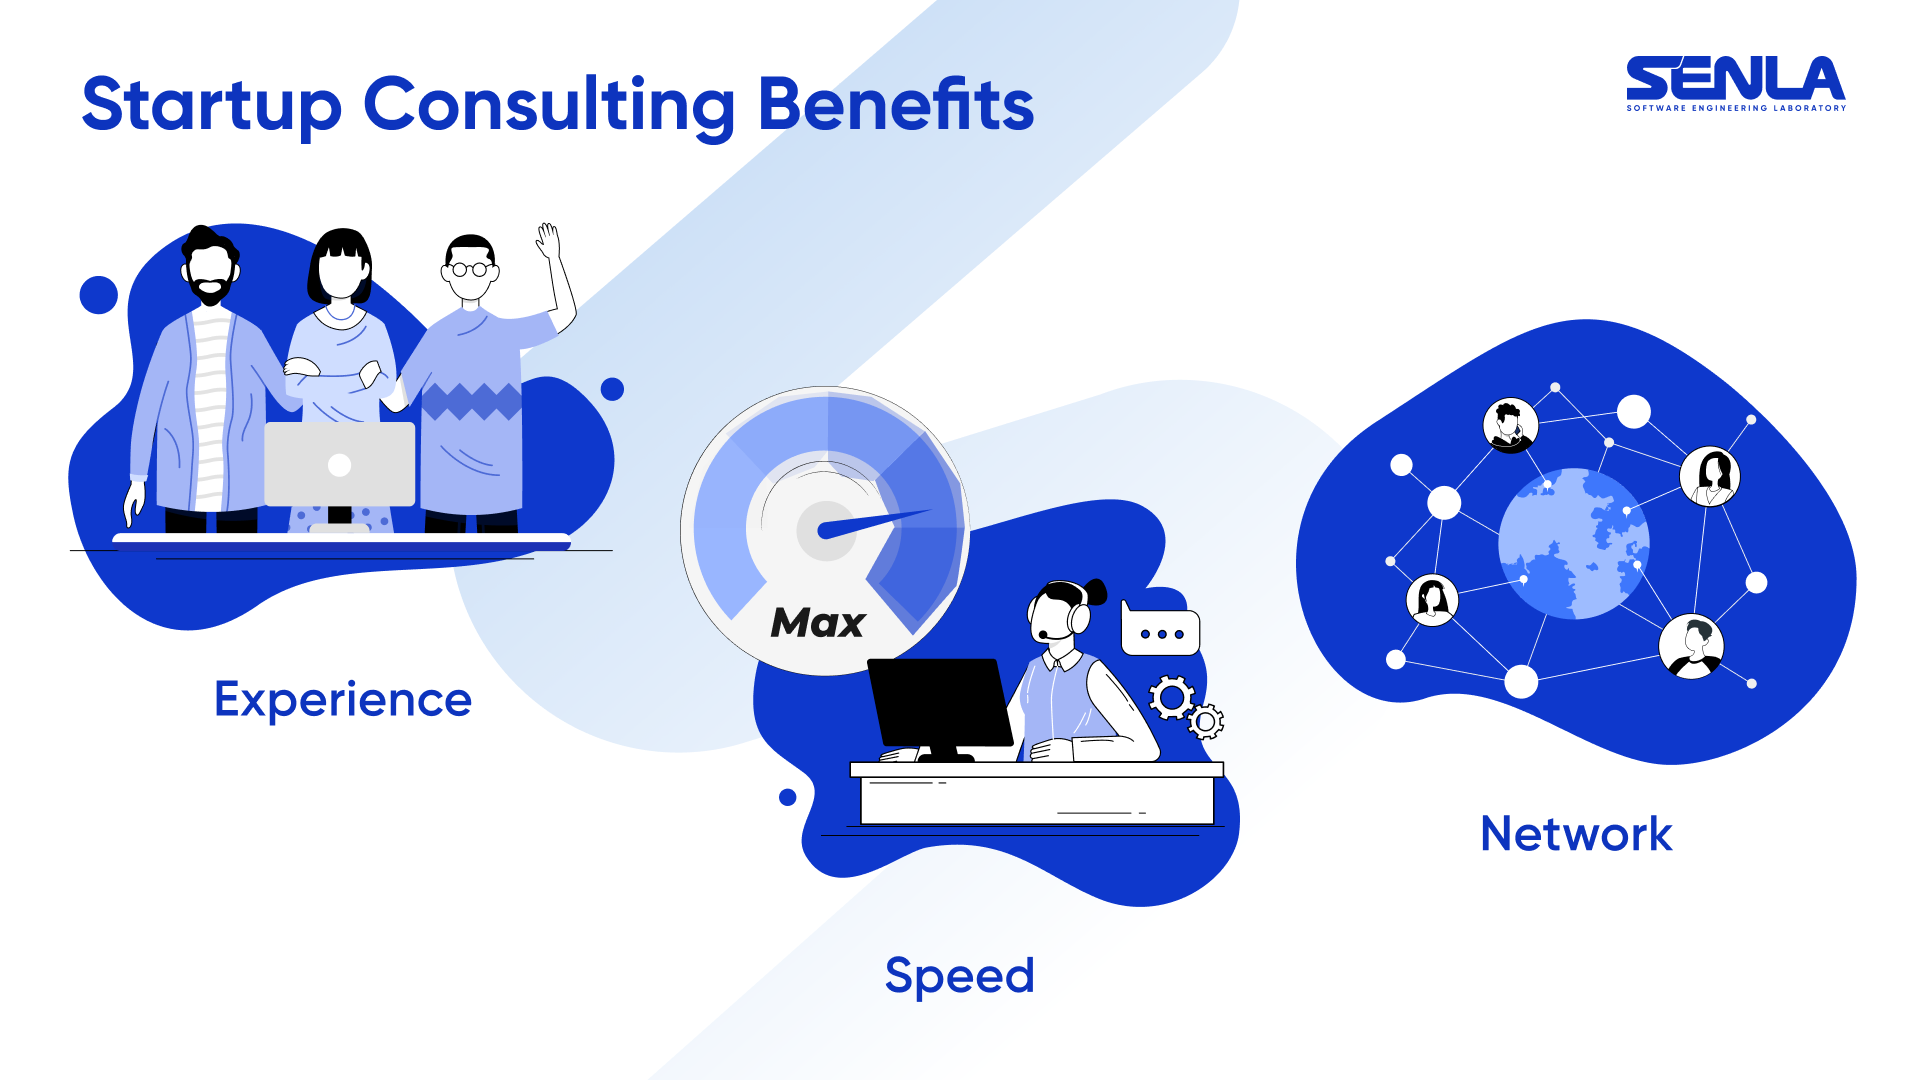 Startup consulting benefits